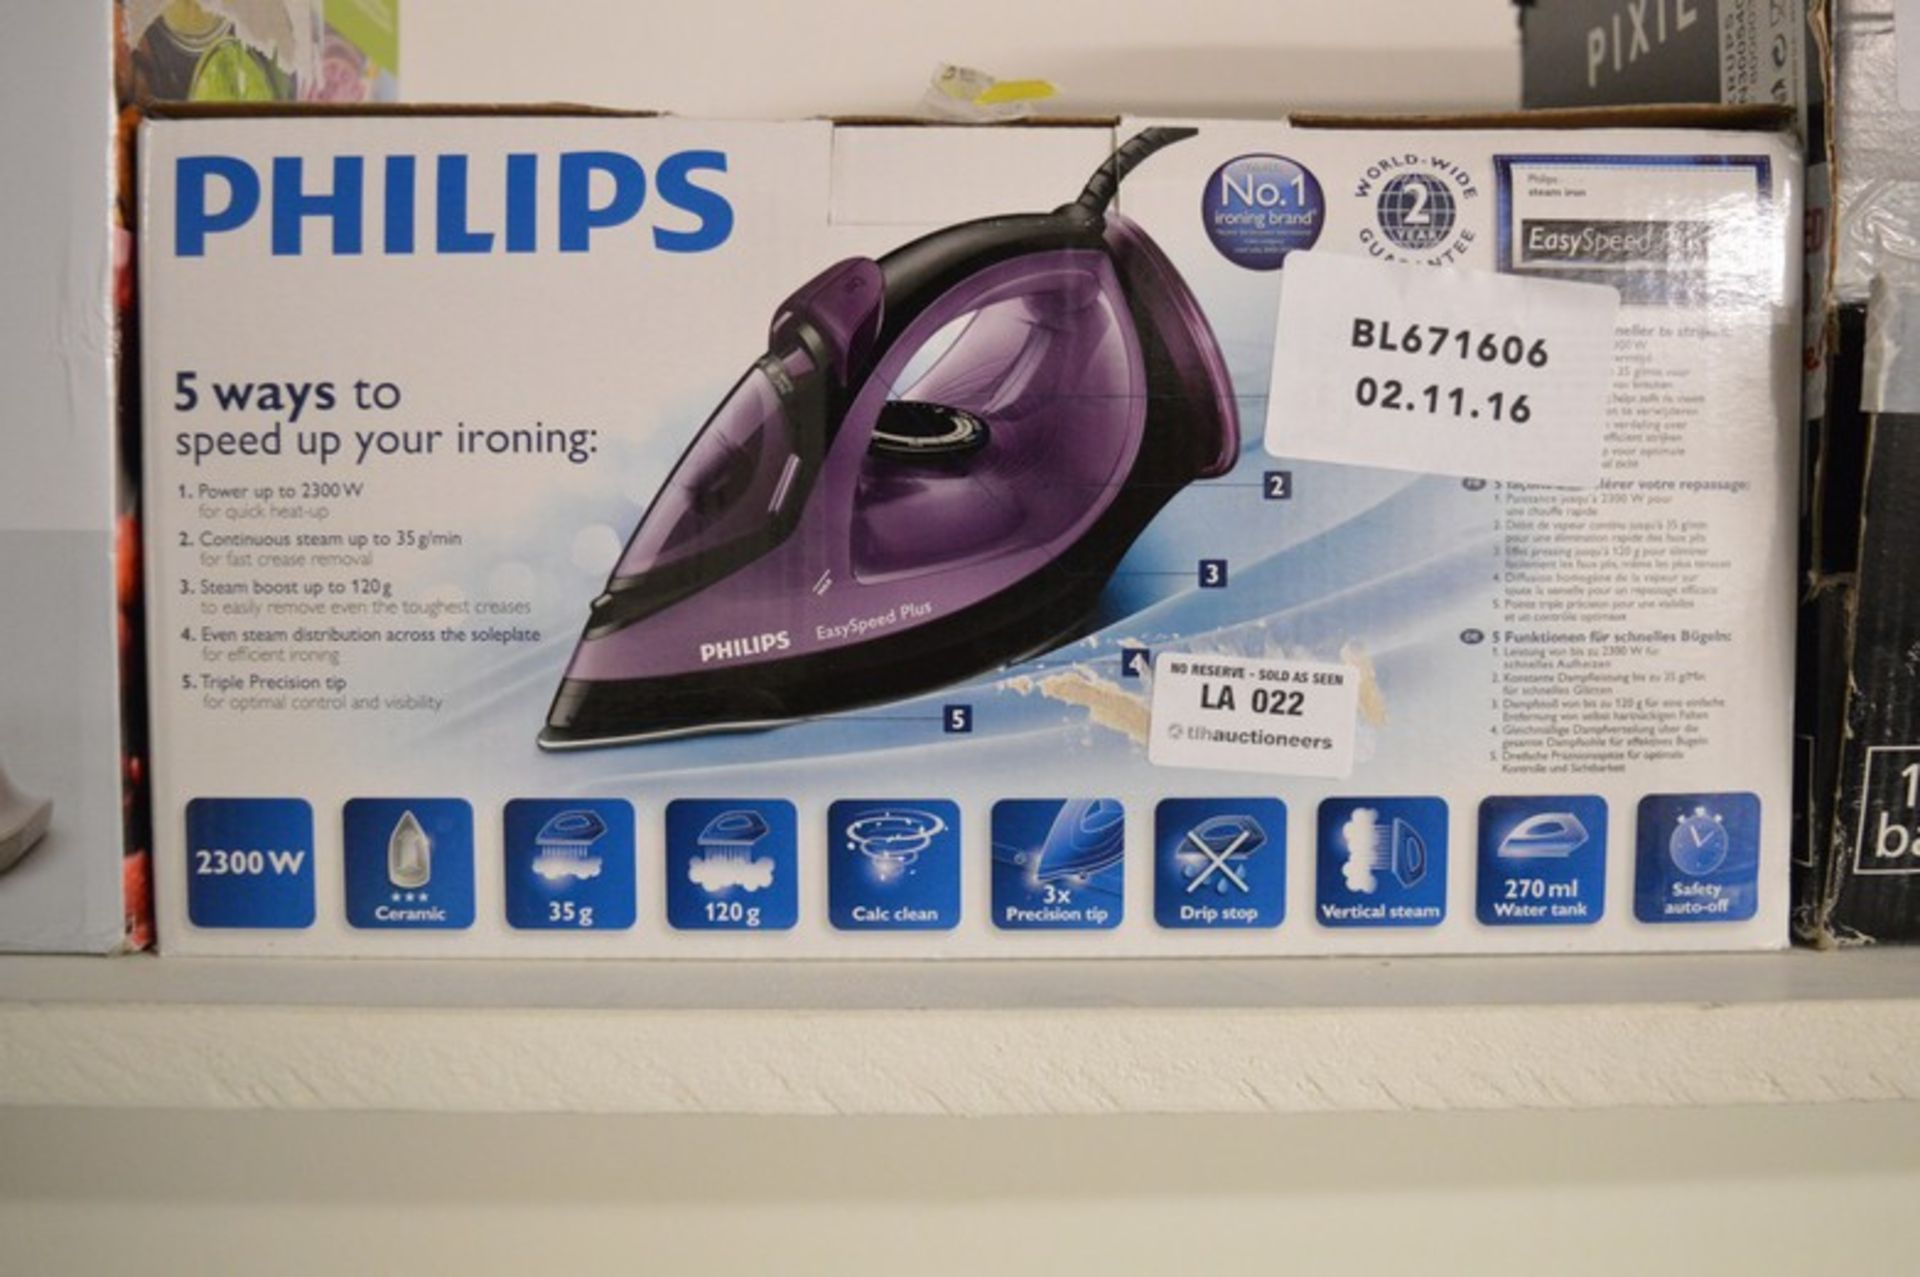 1 x PHILIPS 2300W STEAM IRON RRP £145 02.11.16 *PLEASE NOTE THAT THE BID PRICE IS MULTIPLIED BY